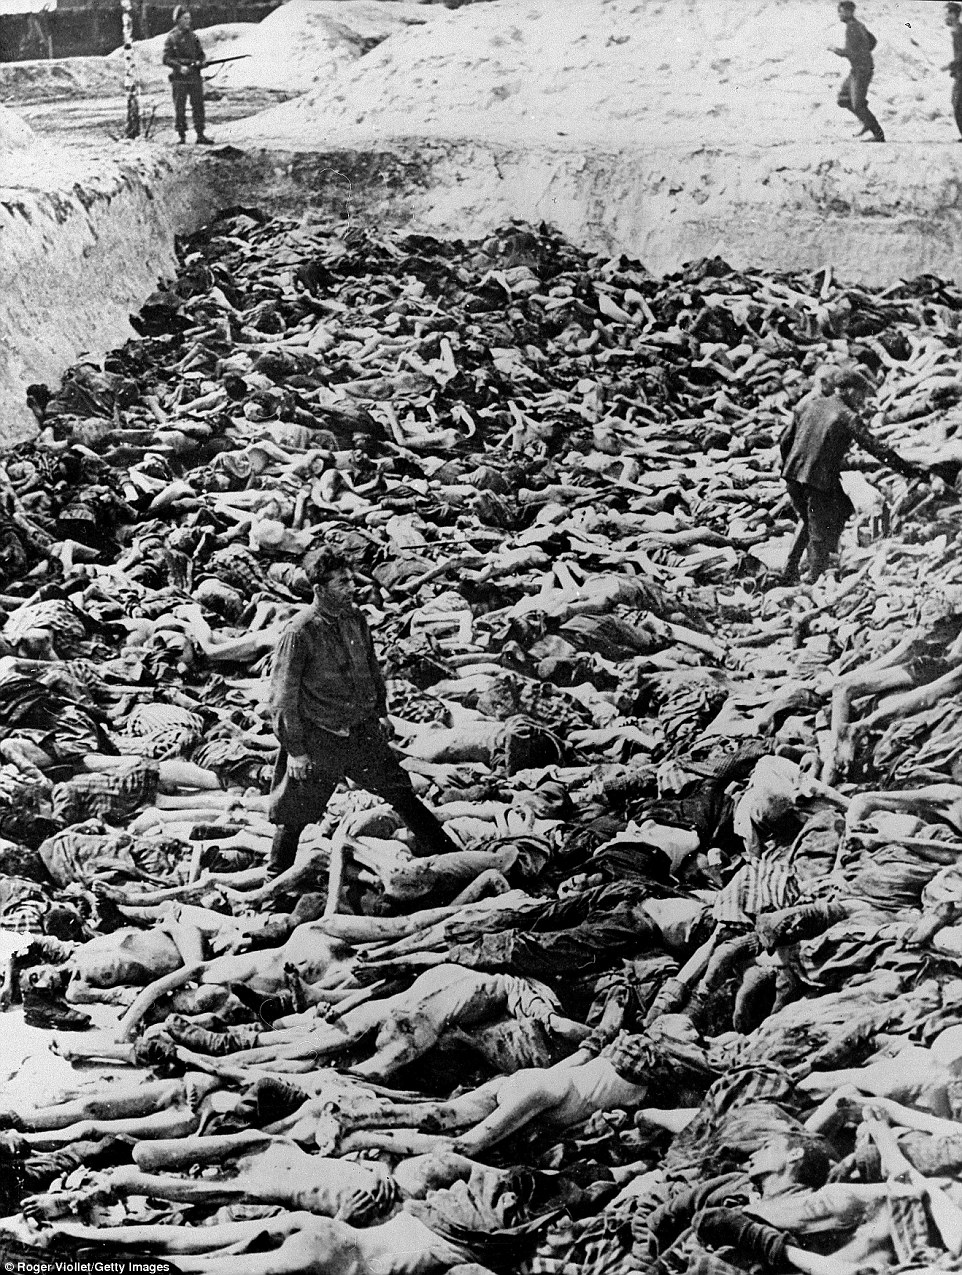 April 1945: Fritz Klein, a Nazi camp doctor who conducted medical experiments on prisoners during the Holocaust, stands among corpses in a mass grave after the liberation of Bergen-Belsen, Germany. Of the 38,500 inmates found barely alive after liberation, about 28,000 subsequently died. Watched by British soldiers, Klein is pictured here being forced to bury the dead. That December, he was sentenced to death and hanged for his role in the atrocities. Bergen-Belsen was the first Nazi camp to be liberated - and gave the world some of the first visual evidence of the horrors of the Holocaust